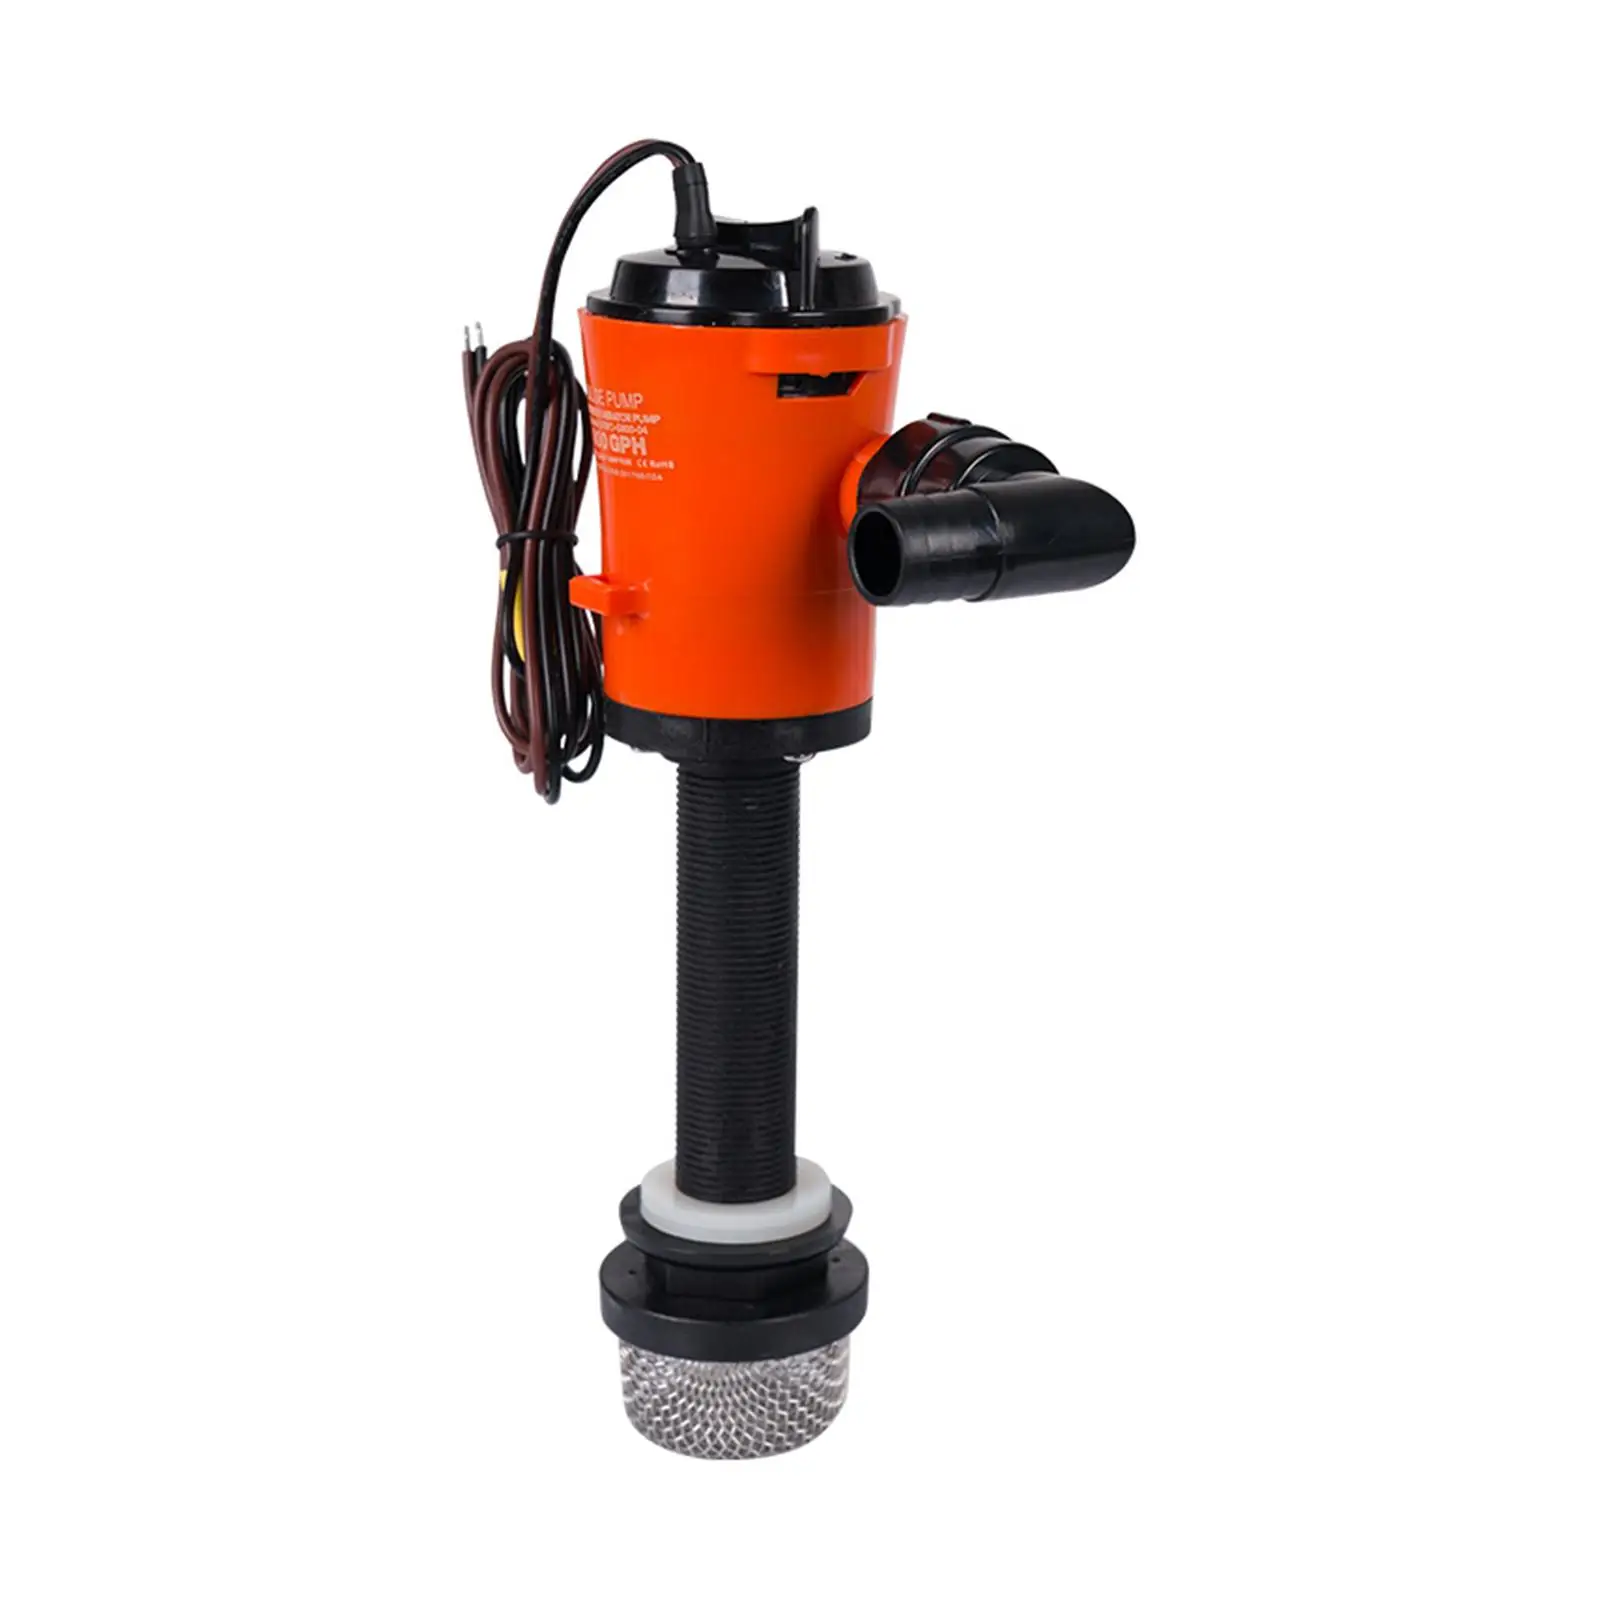 Livewell Pump Direct Replaces Accessories Professional Boat Aerator Pump